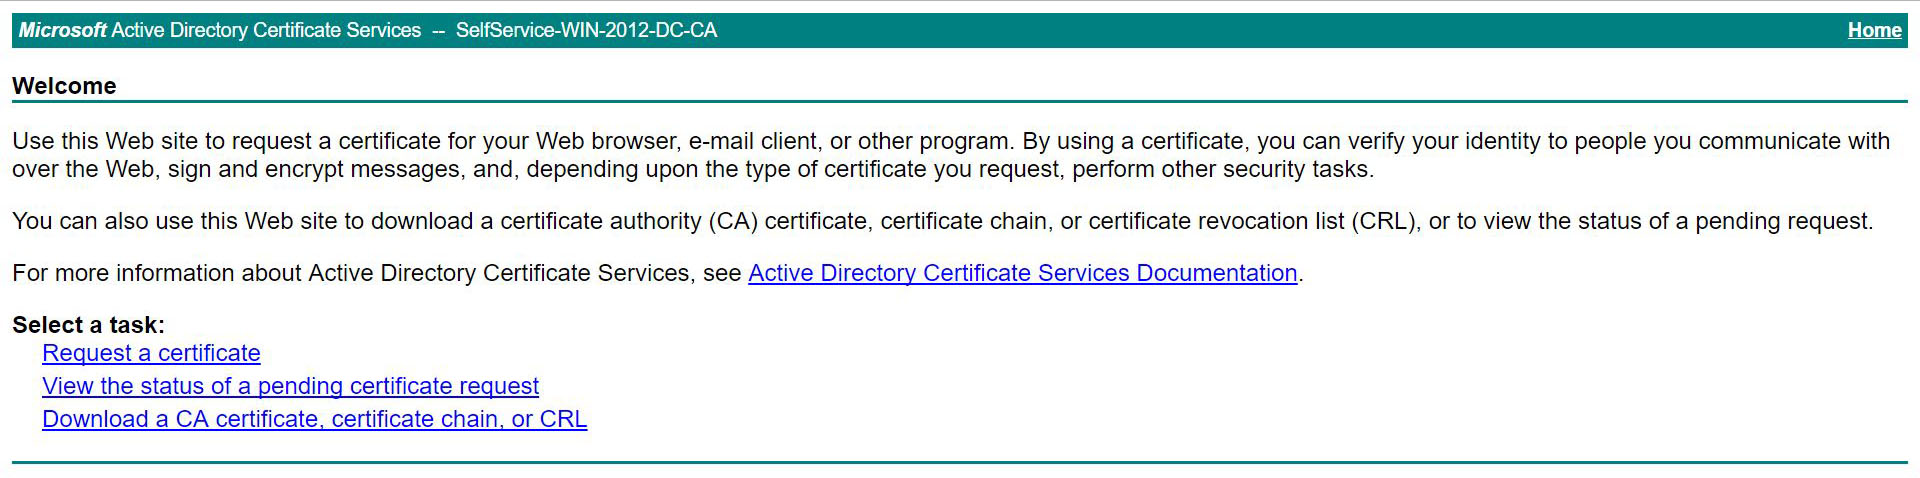 Запрос сертификата Windows. Pending status. «Process the pending request and install the Certificate». Self signed Certificate in Certificate Chain. Запроса сертификата https